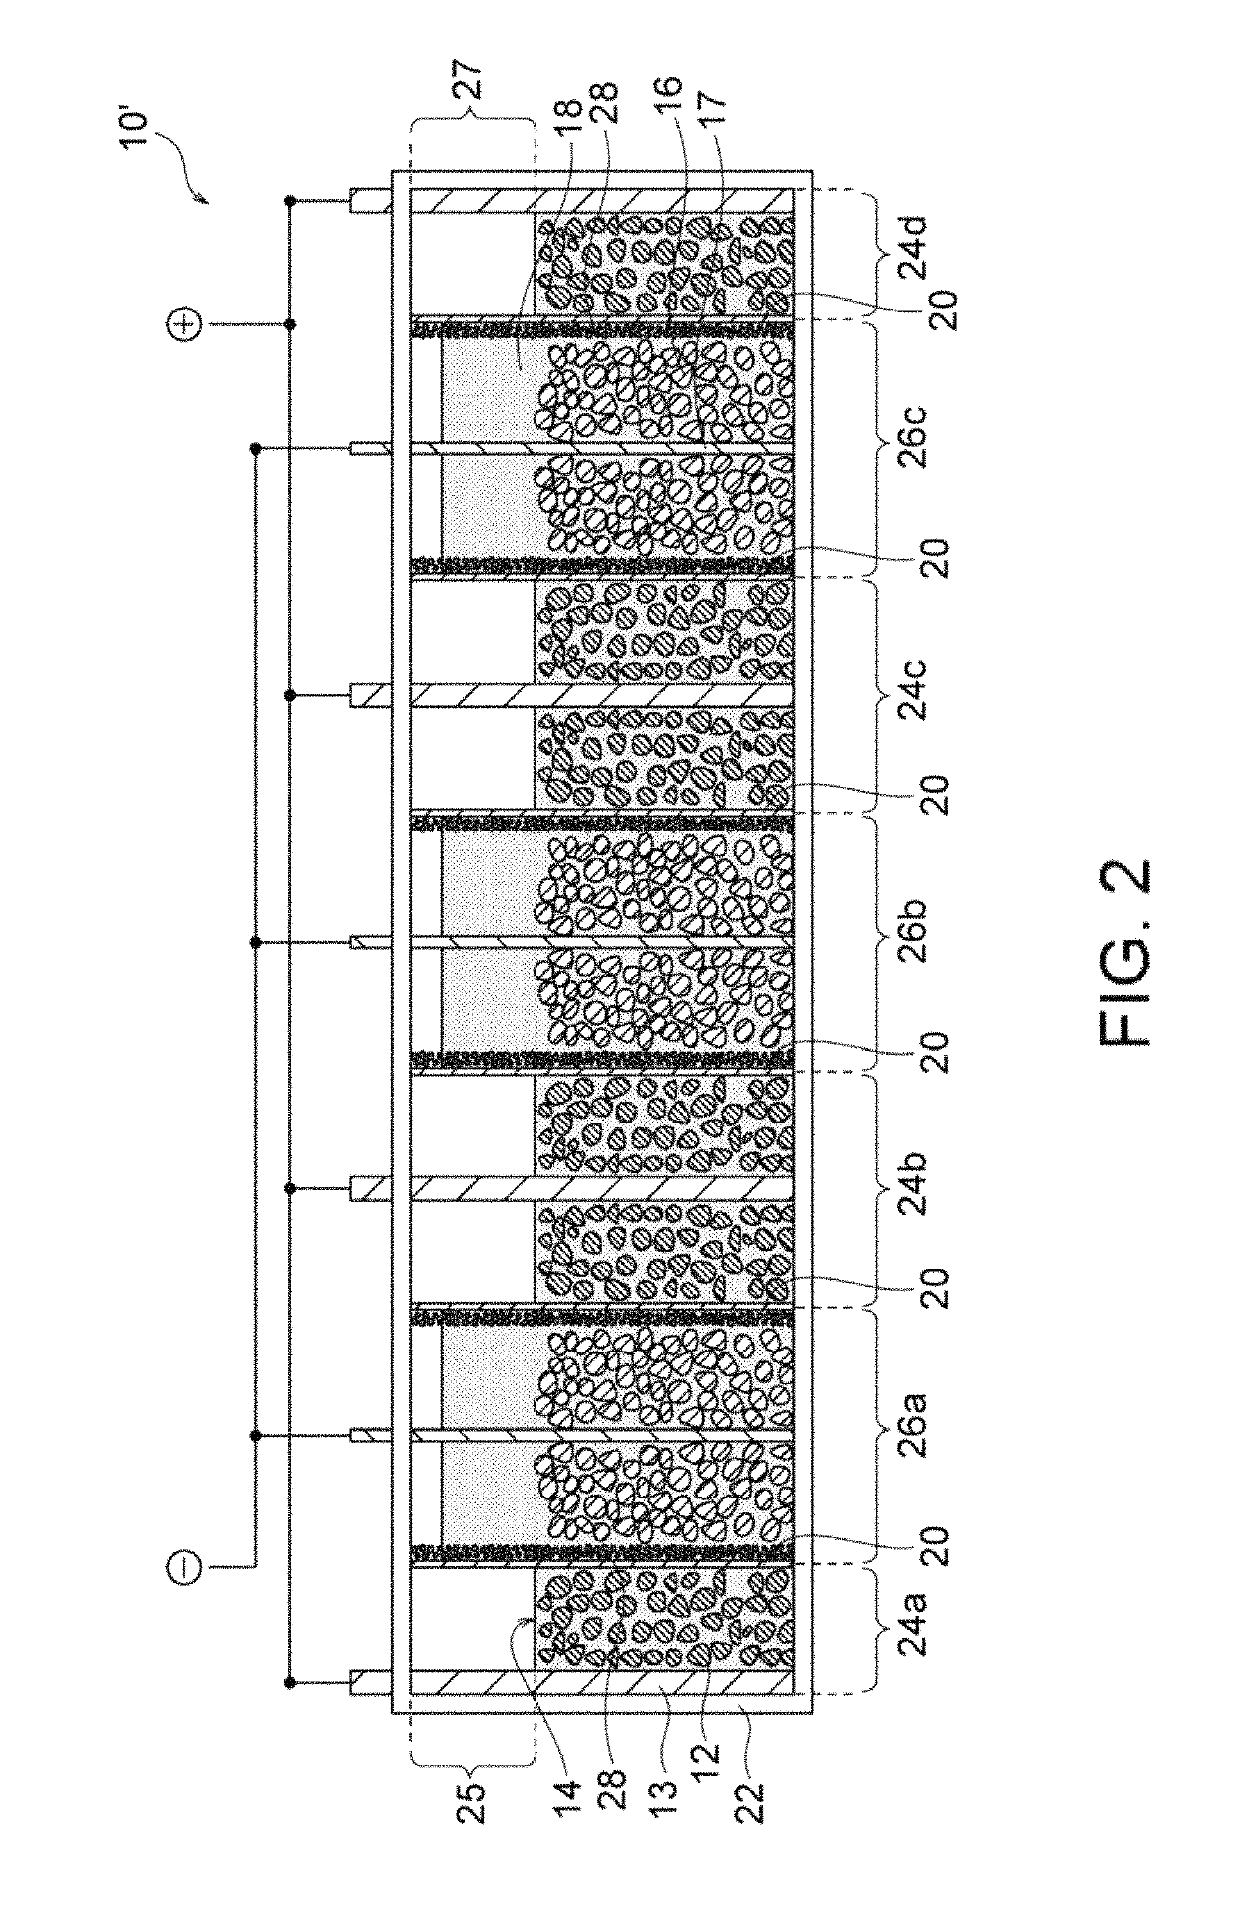 Secondary battery with hydroxide-ion-conducting ceramic separator